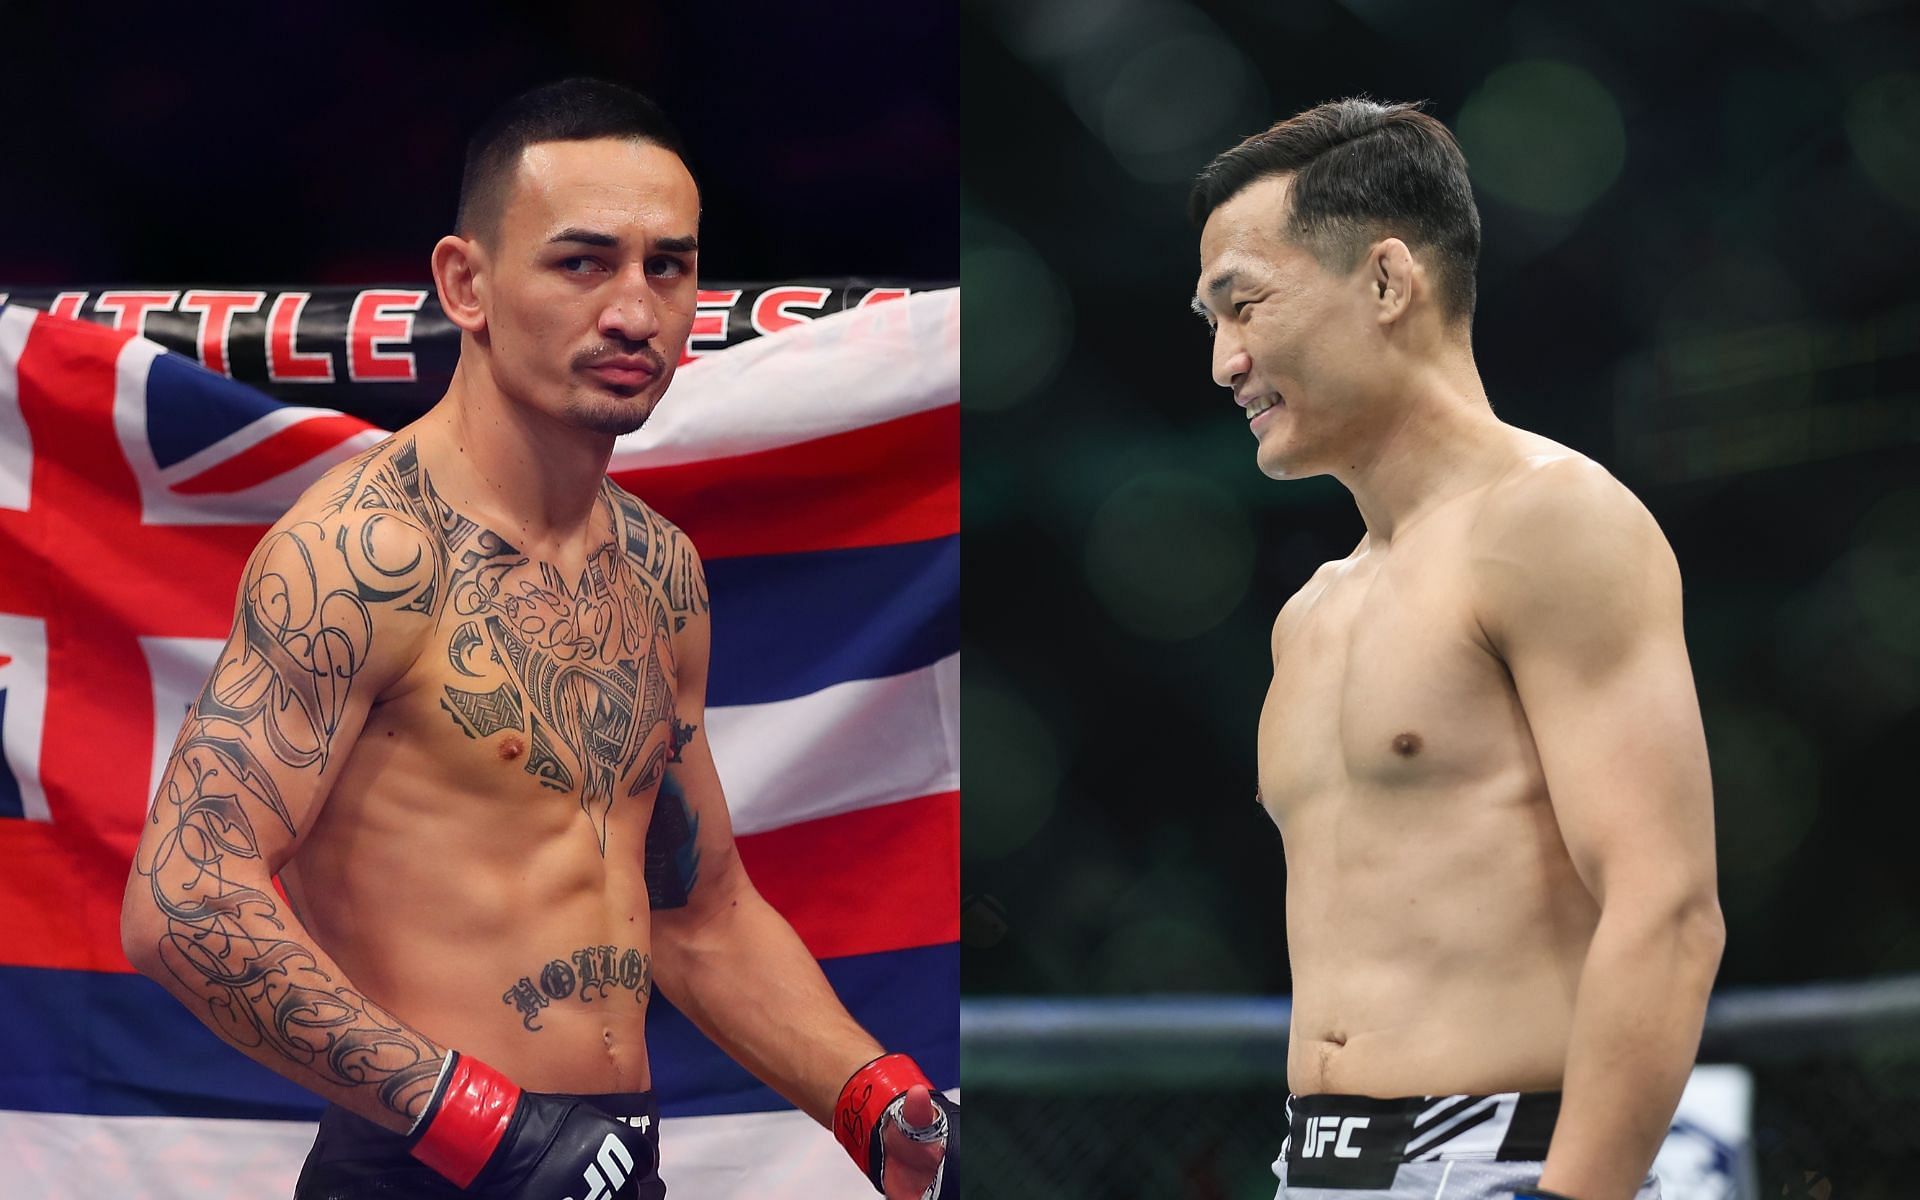 Max Holloway and The Korean Zombie [Image credits: Getty Images]